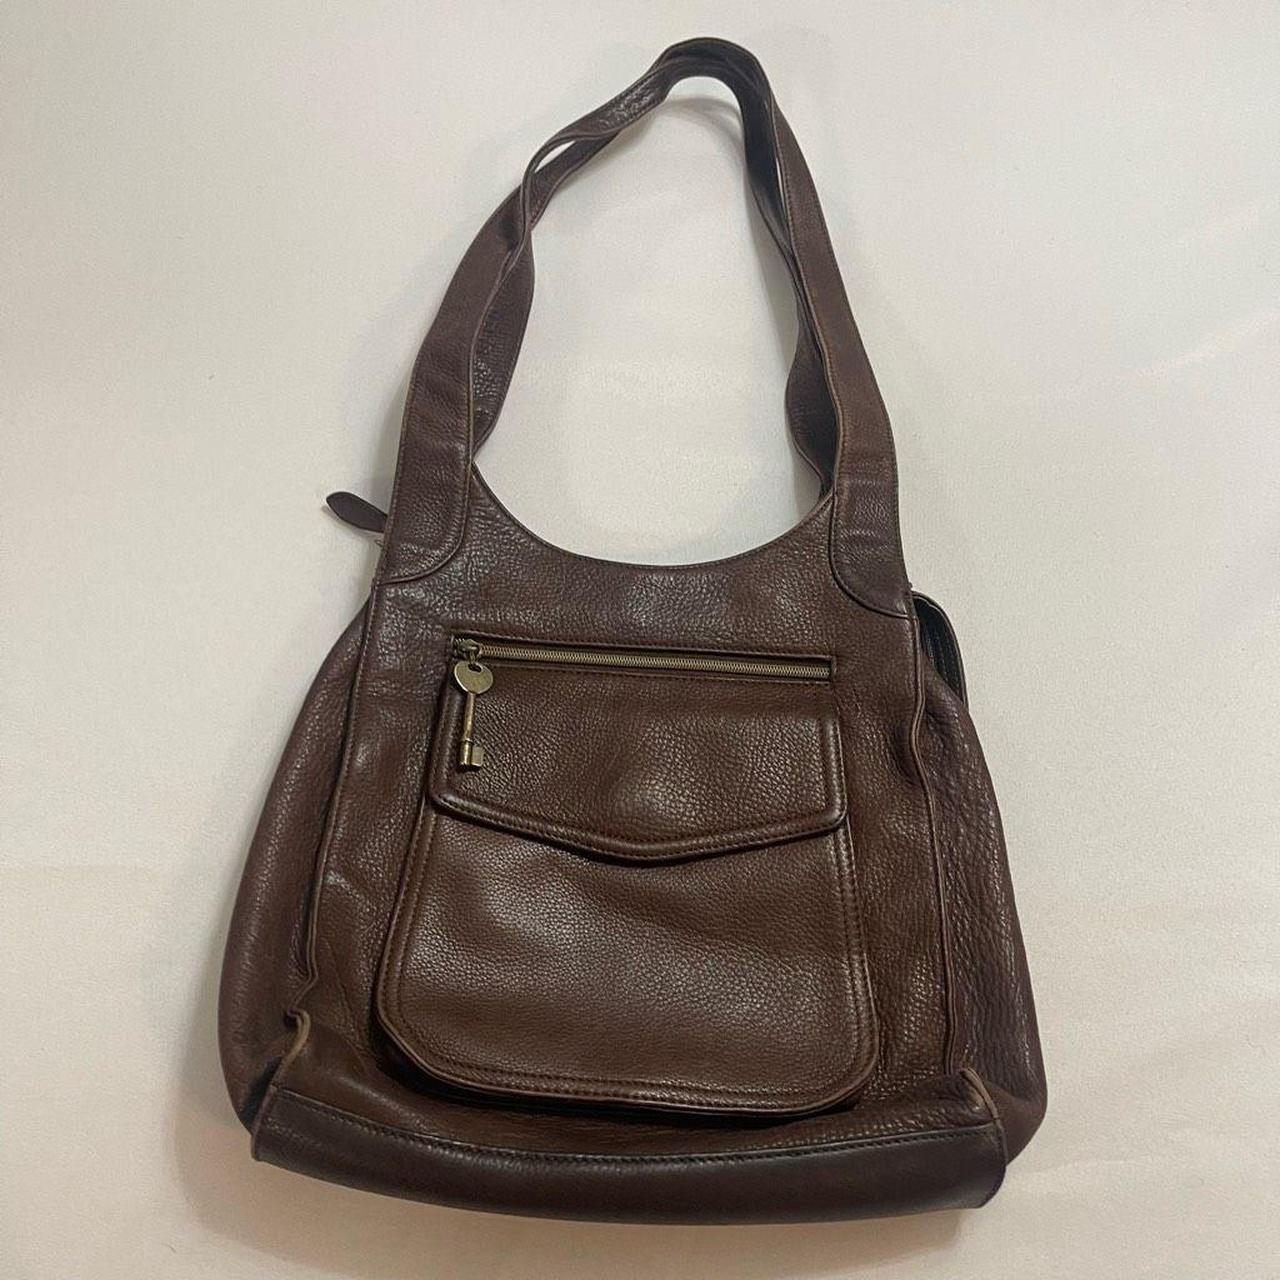 Vintage Fossil 1954 Shoulder Bag Purse Brown Soft Leather Distressed 75082  Flap | Purses and bags, Purses, Soft leather